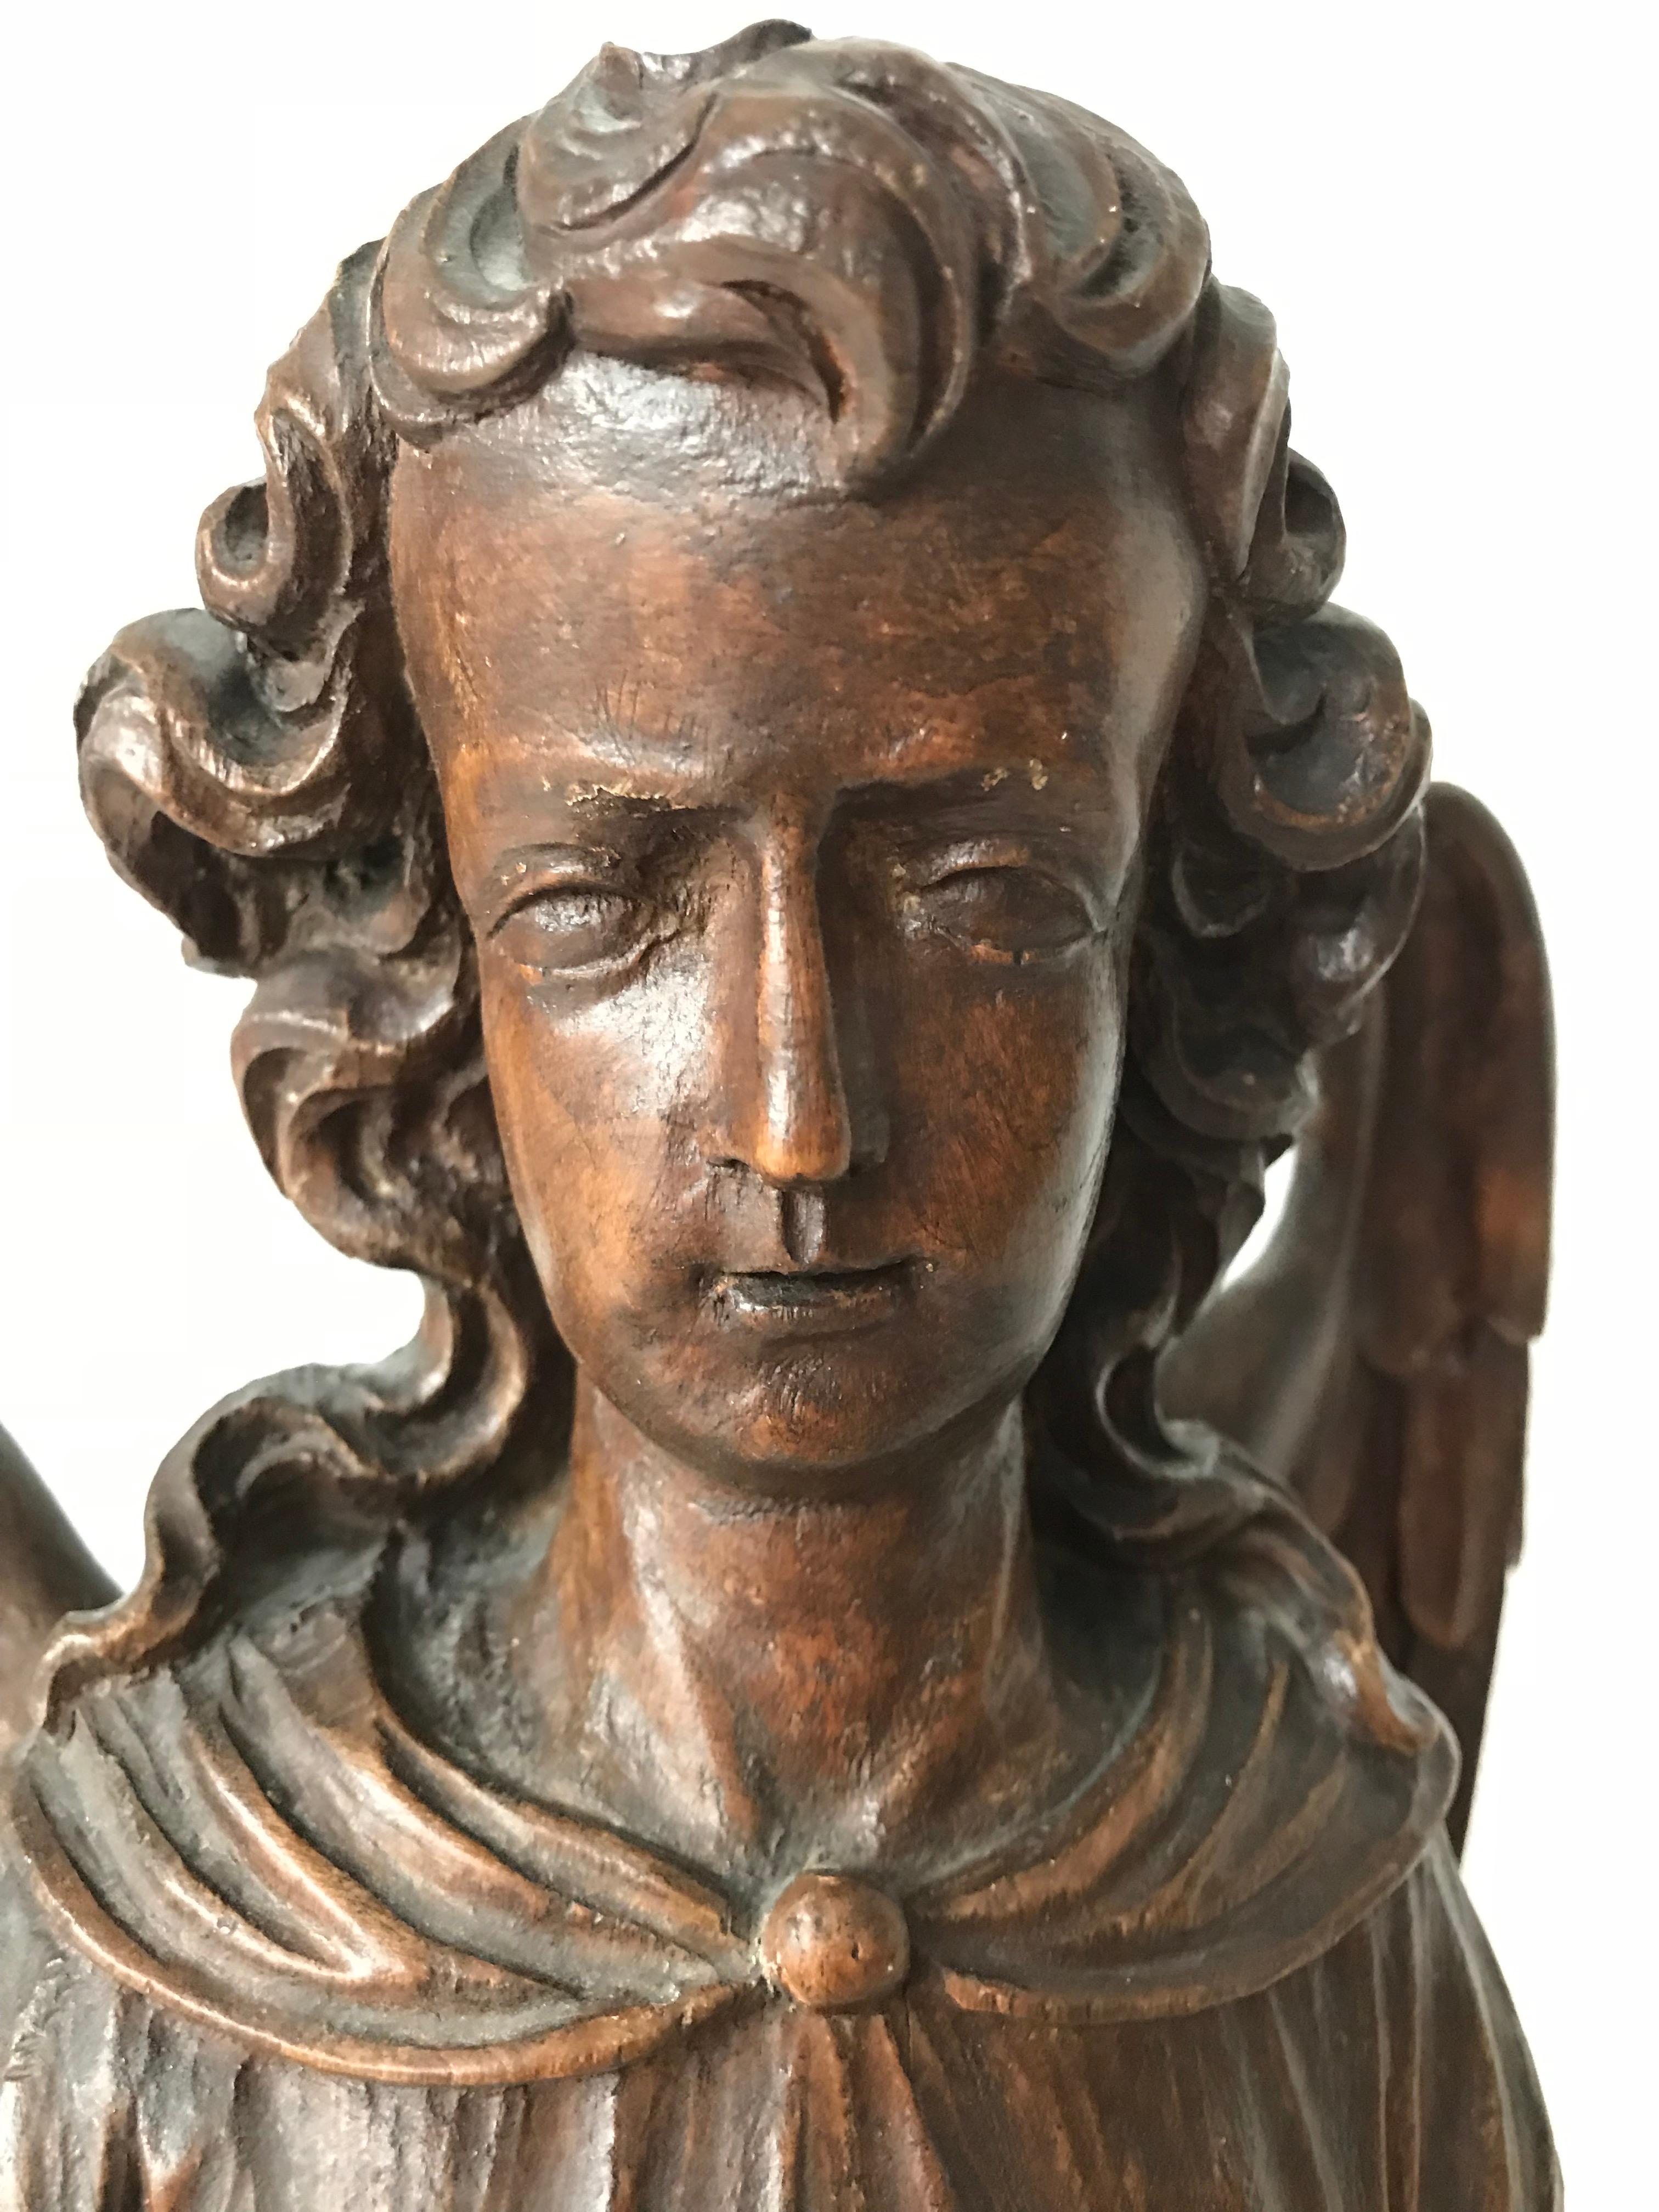 Antique solid wooden, standing angel.

This rare angelic sculpture is entirely hand-carved out of wood. His beautifully flowing, long hair and arched wings, make us believe that this could be a rare sculpture of Earth Angel Michael. One without his